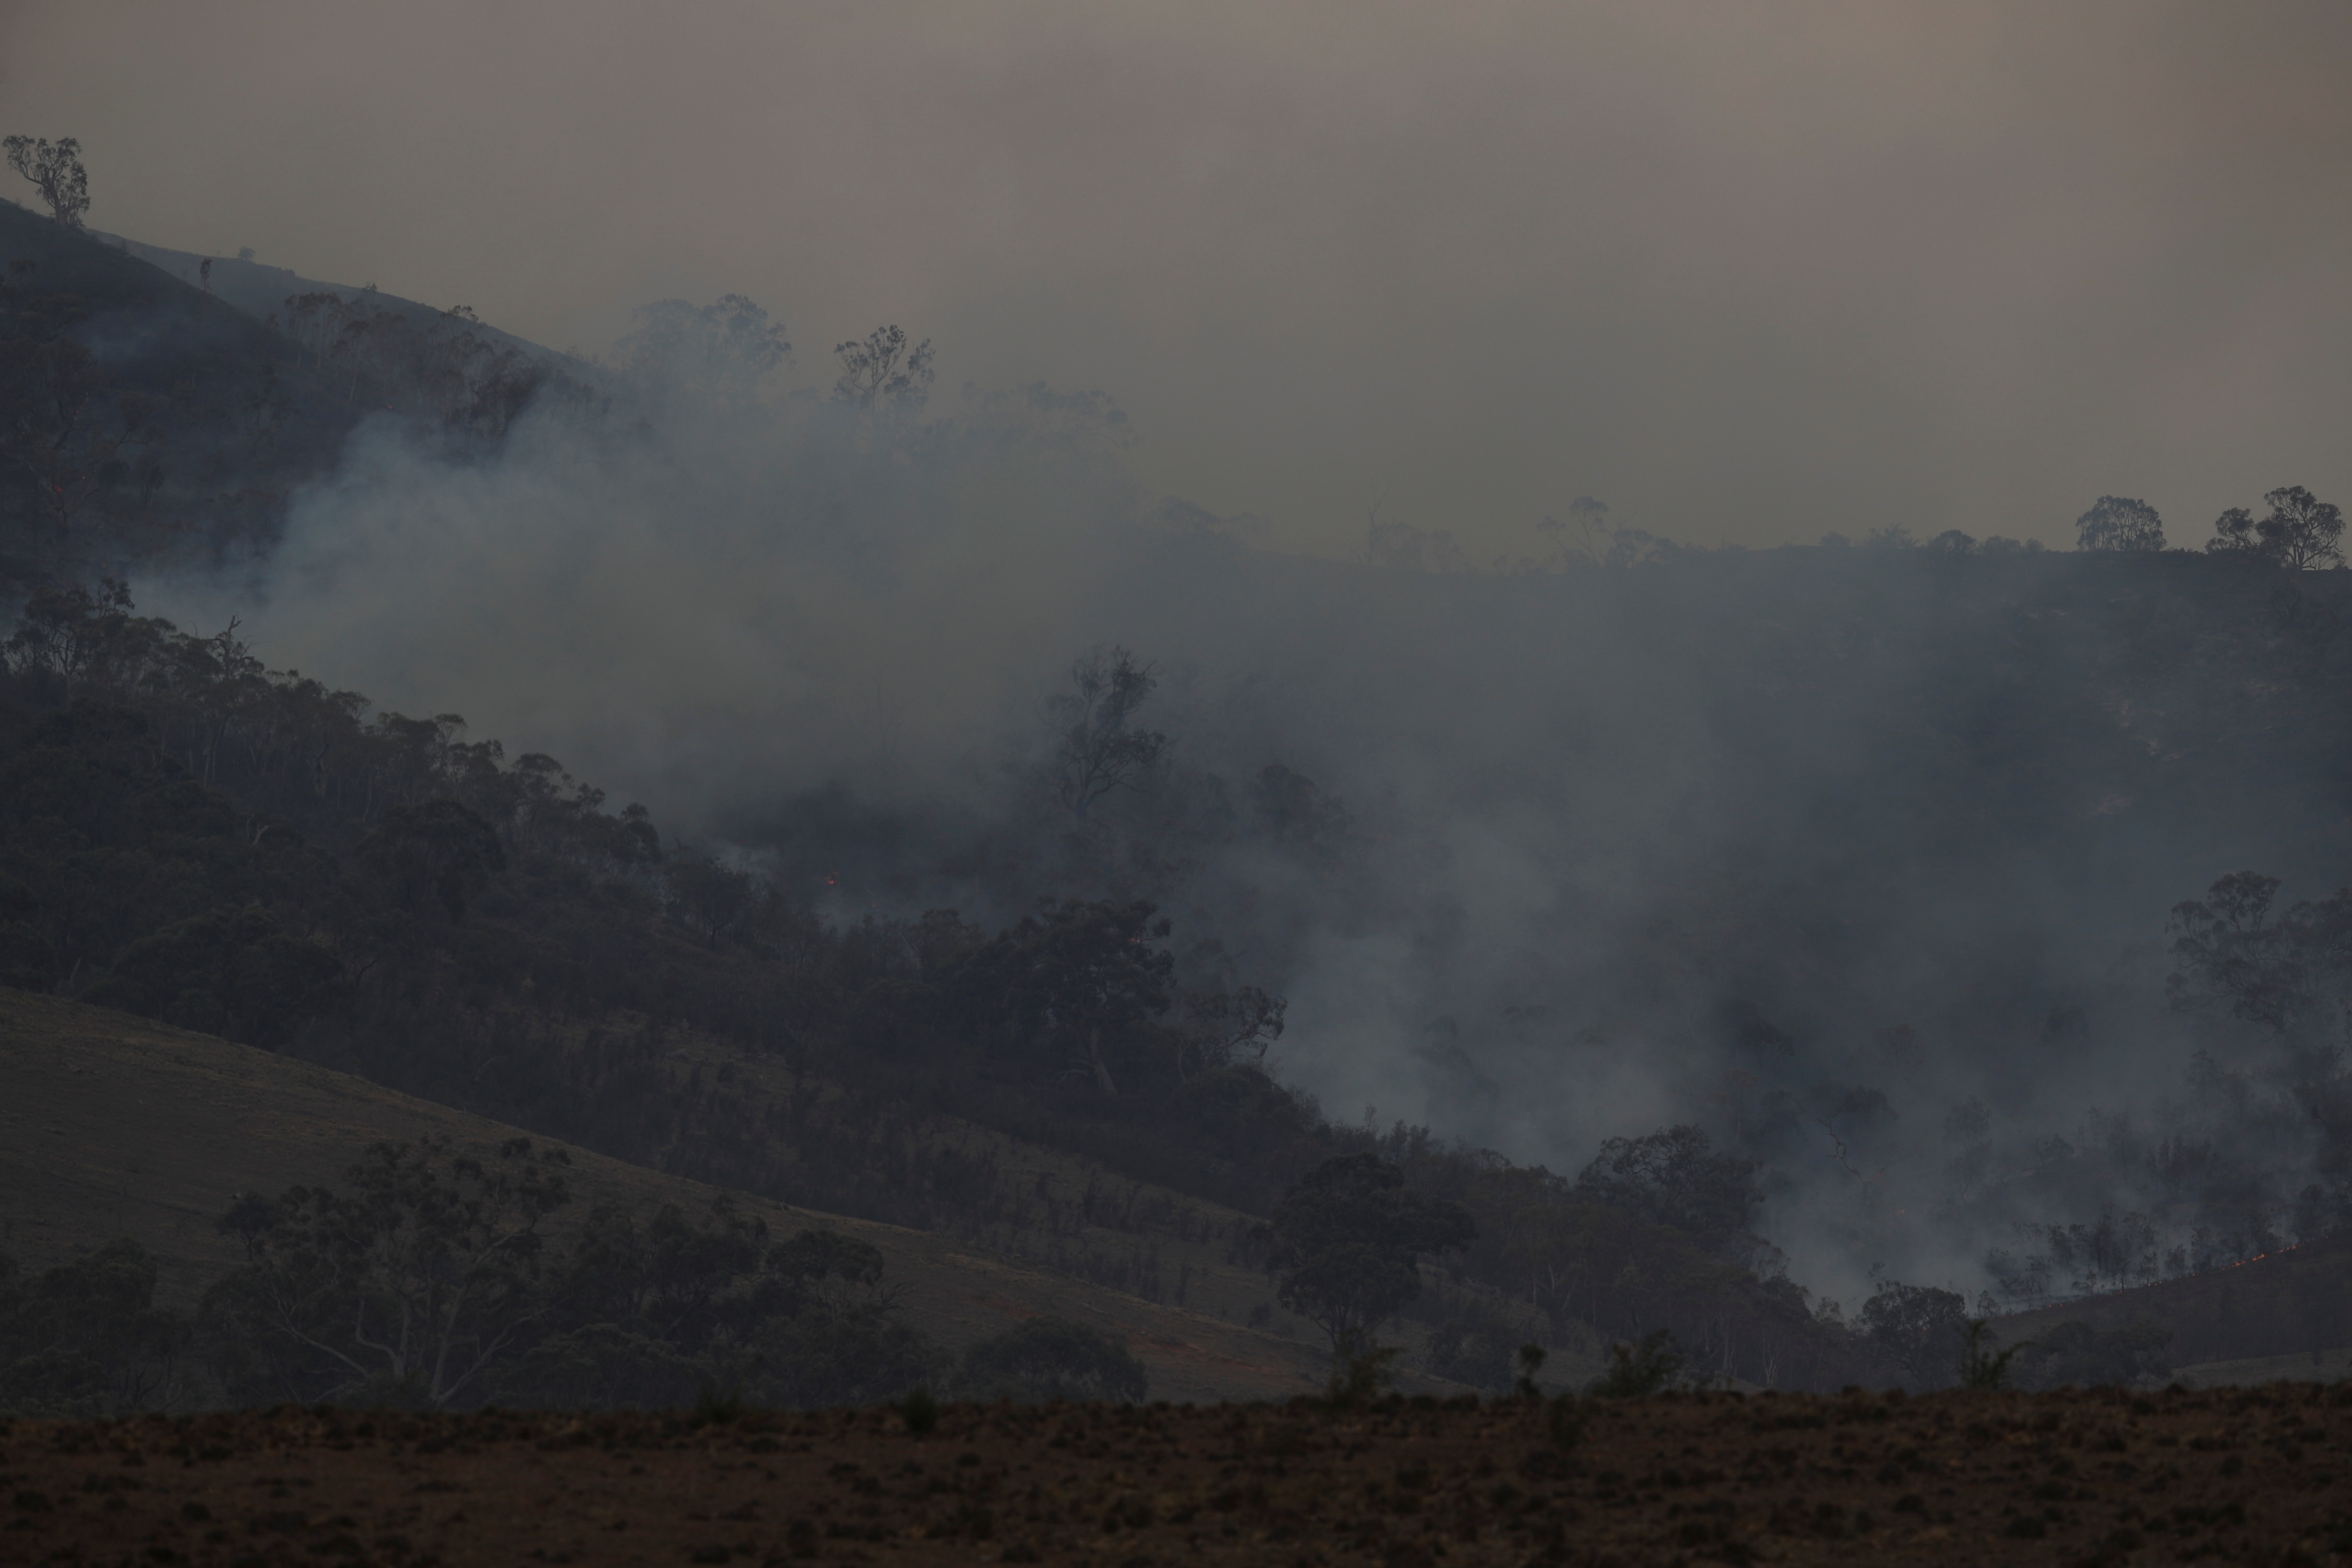 Smoke rises from the smouldering remnants of a bushfire near Bumbalong, New South Wales, Australia, February 2, 2020.